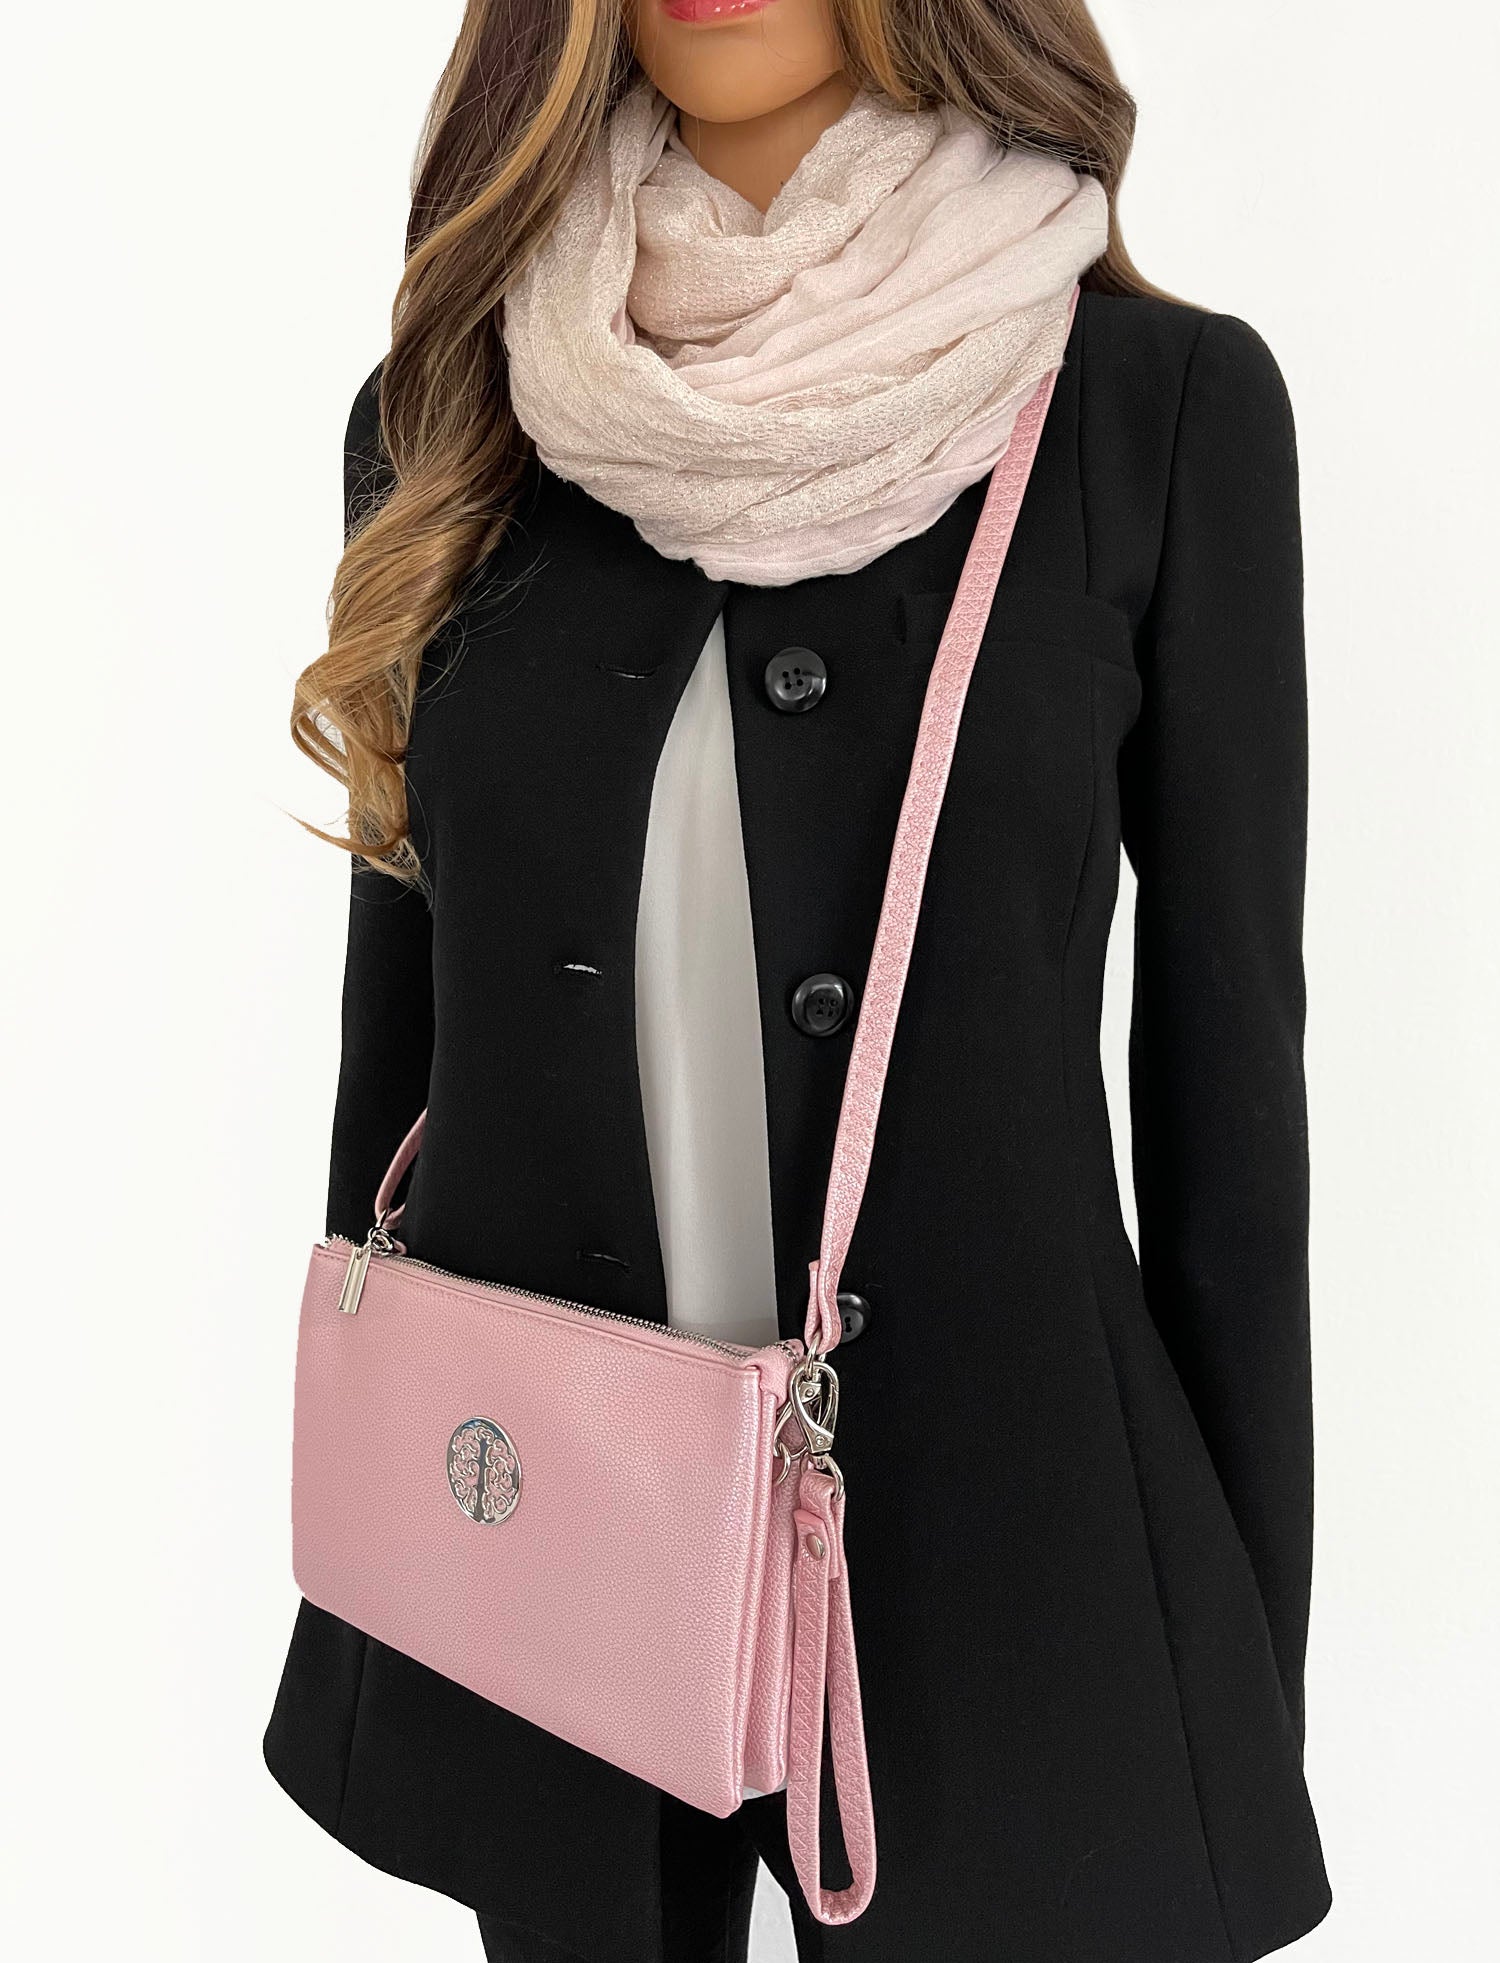 LARGE MULTI-COMPARTMENT CROSS-BODY PURSE BAG WITH WRIST AND LONG STRAPS -  METALLIC PINK